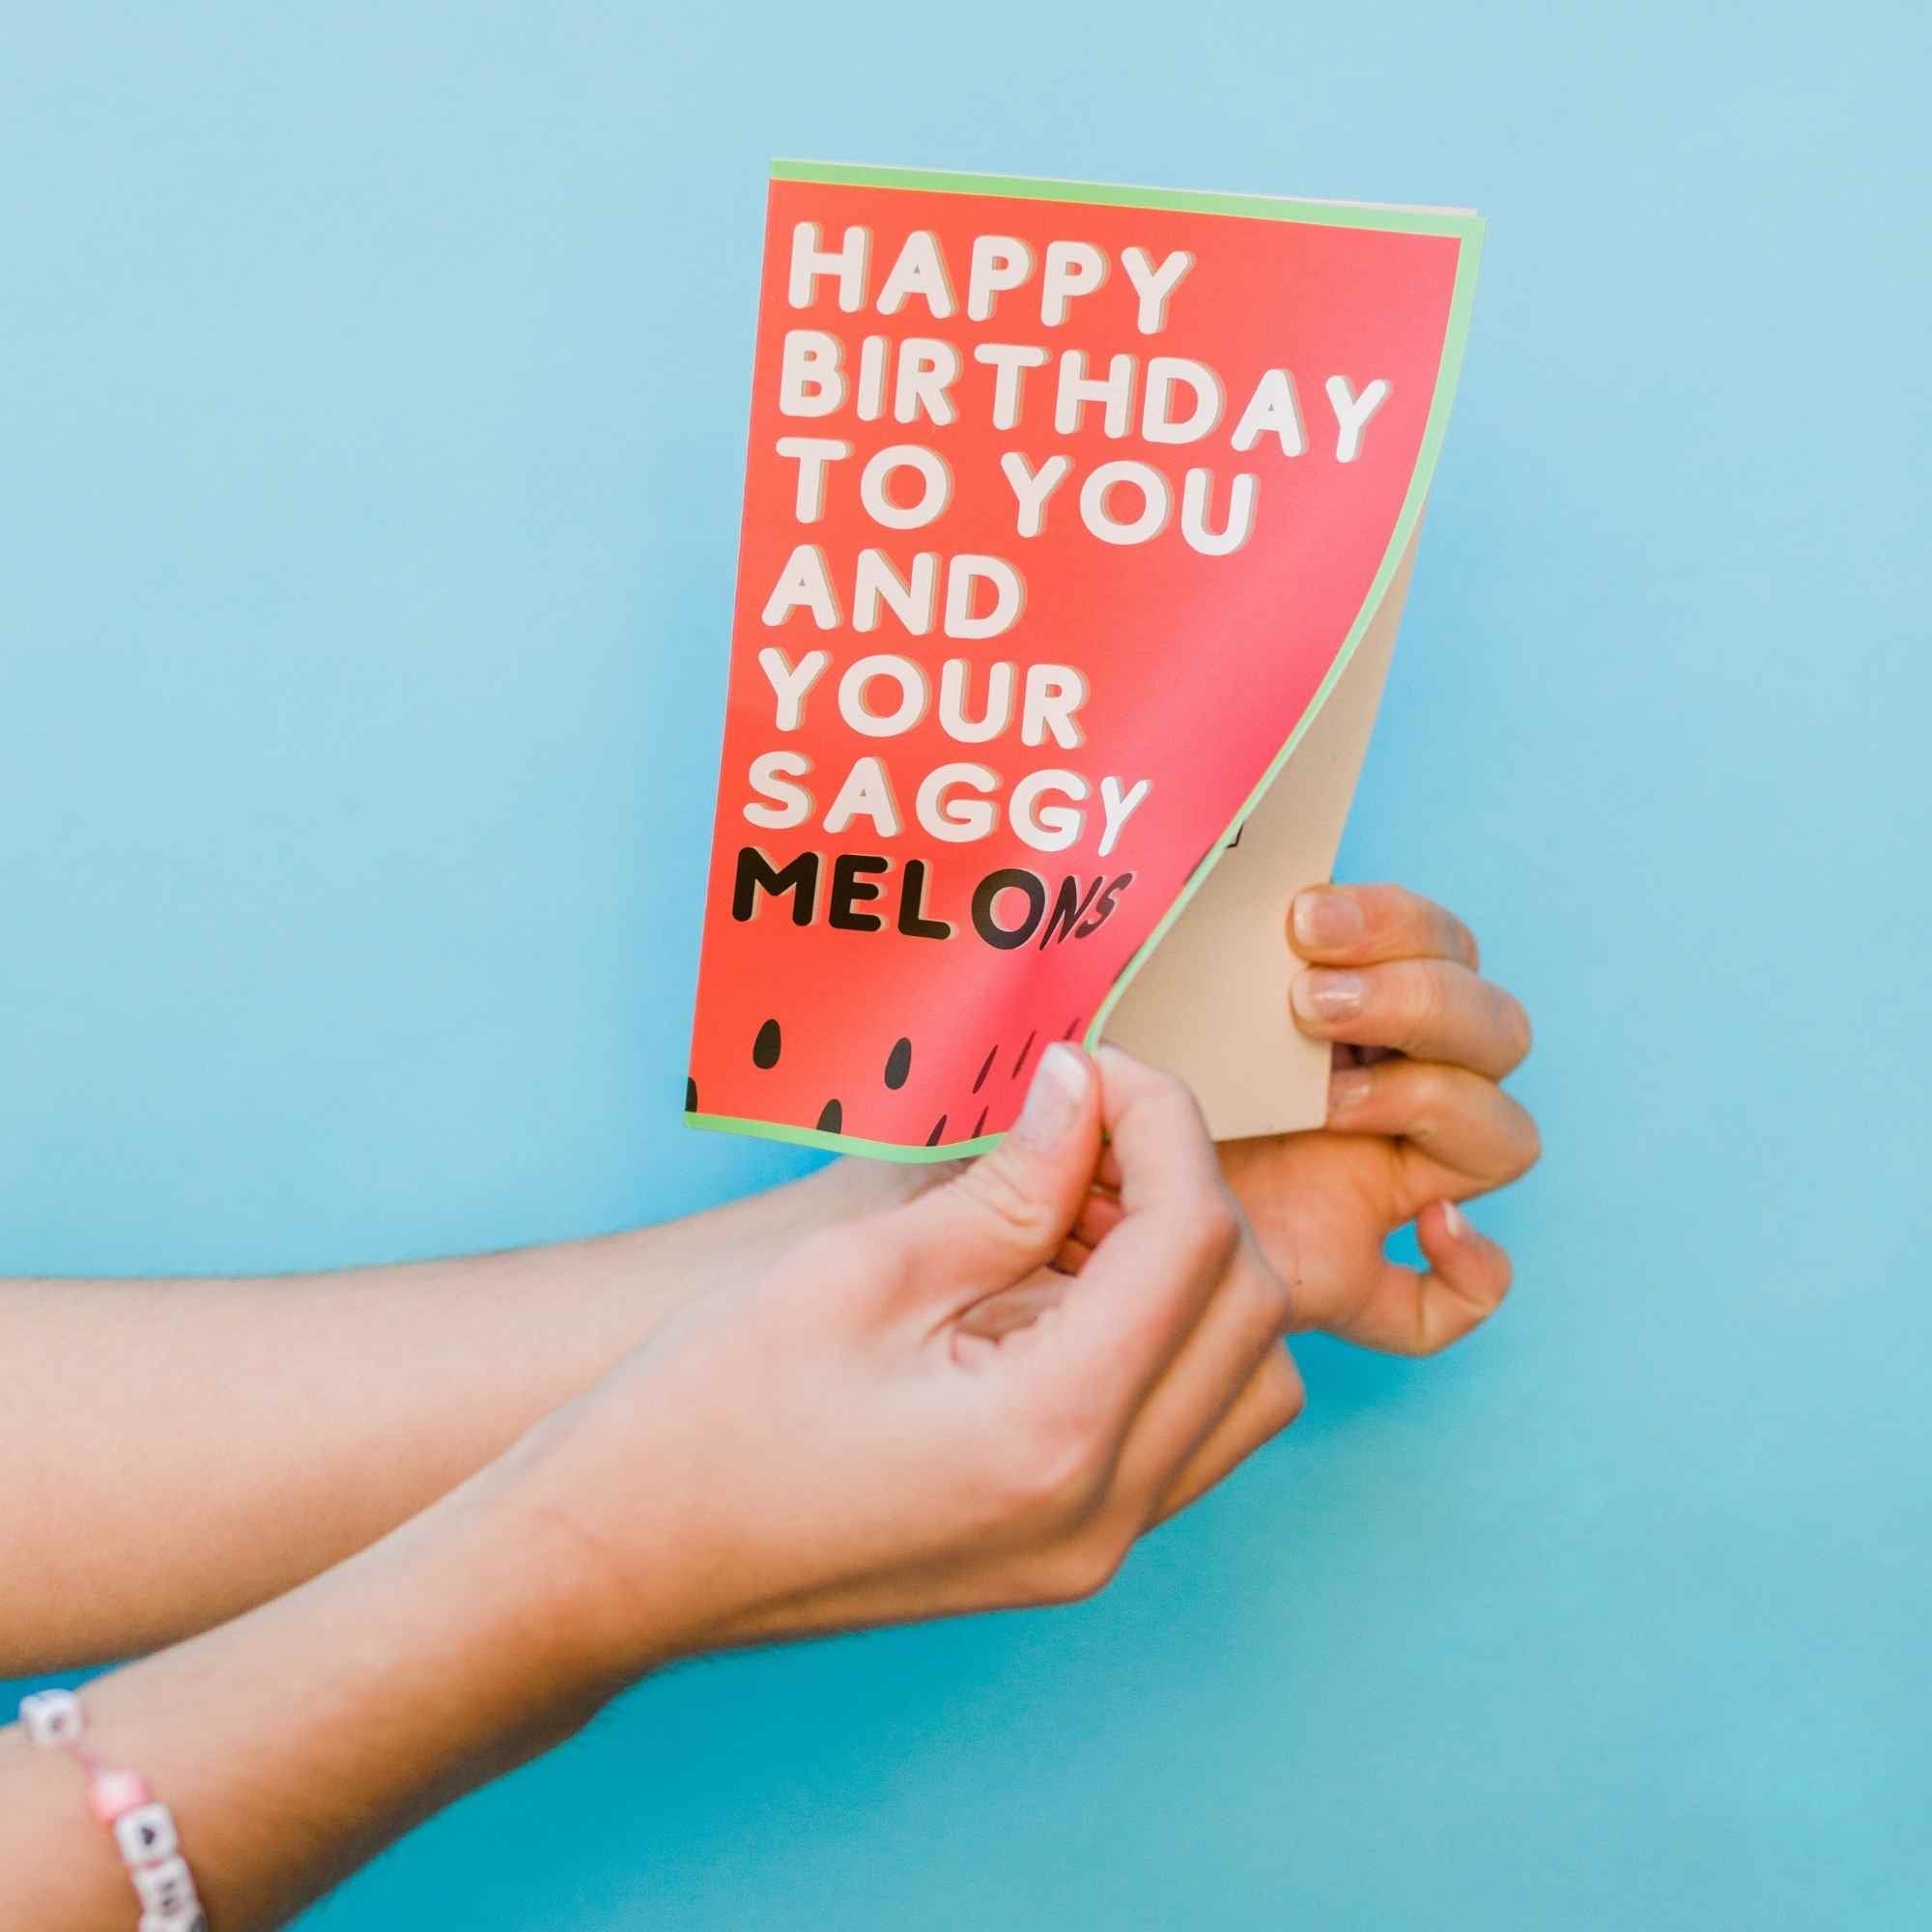 Happy Birthday to You and Your Saggy Melons! - Glitter Bomb Card Pranks Anonymous send hilarious pranks and gag gifts to your friends or family.